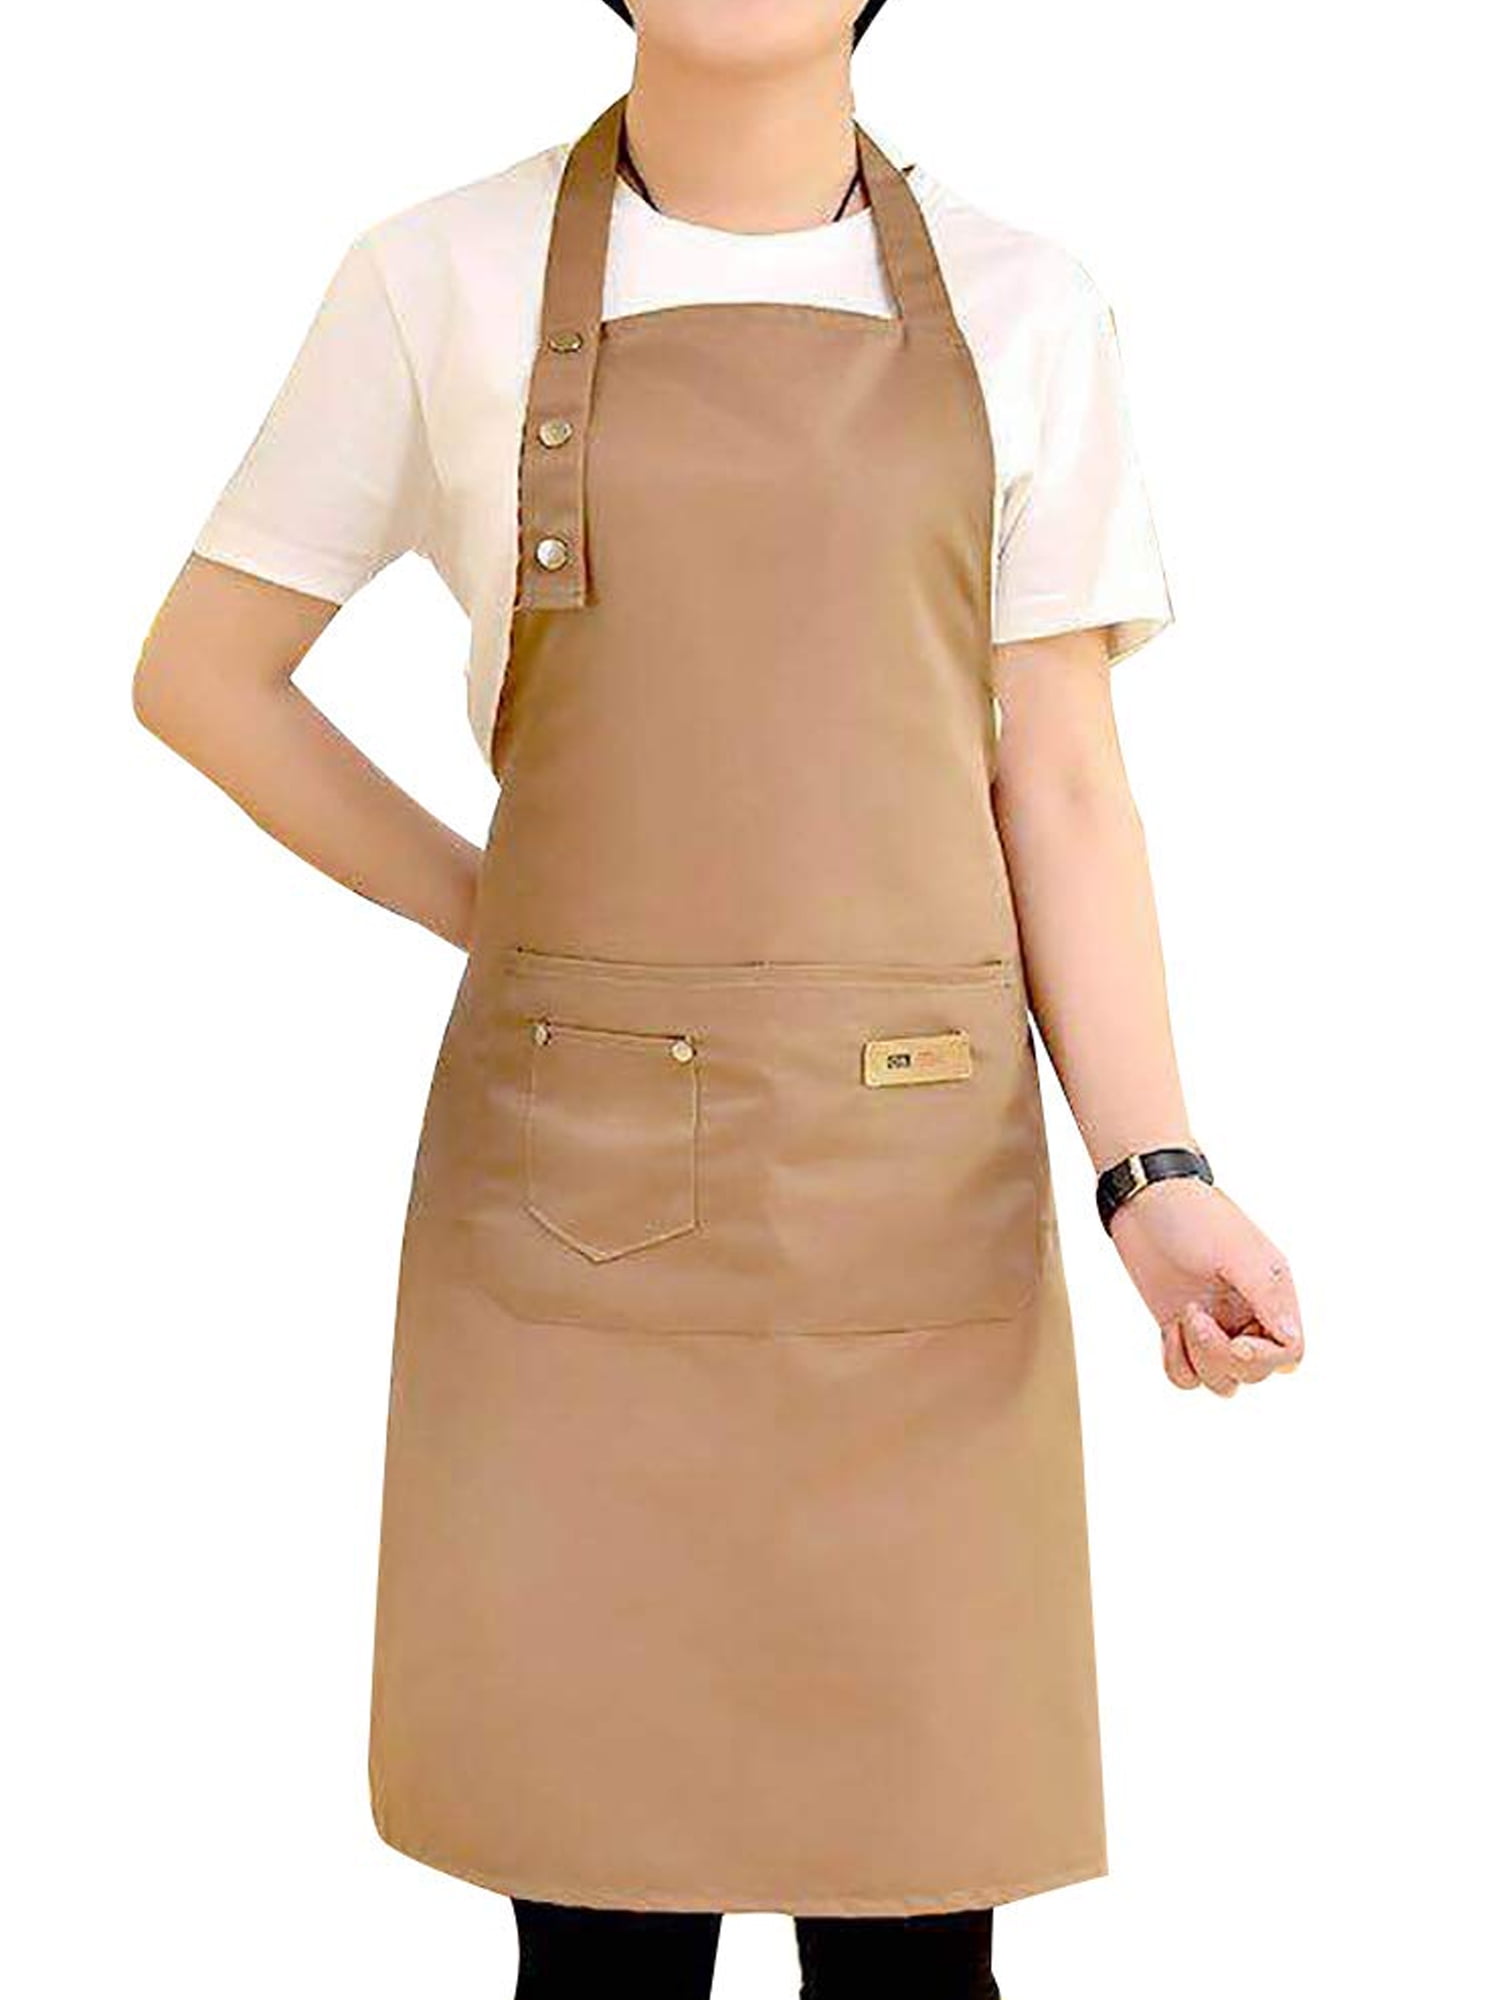 PLAIN APRON WITH POCKET FOR CHEFS BUTCHER HOME KITCHEN COOKING CRAFT BAKING BBQ 